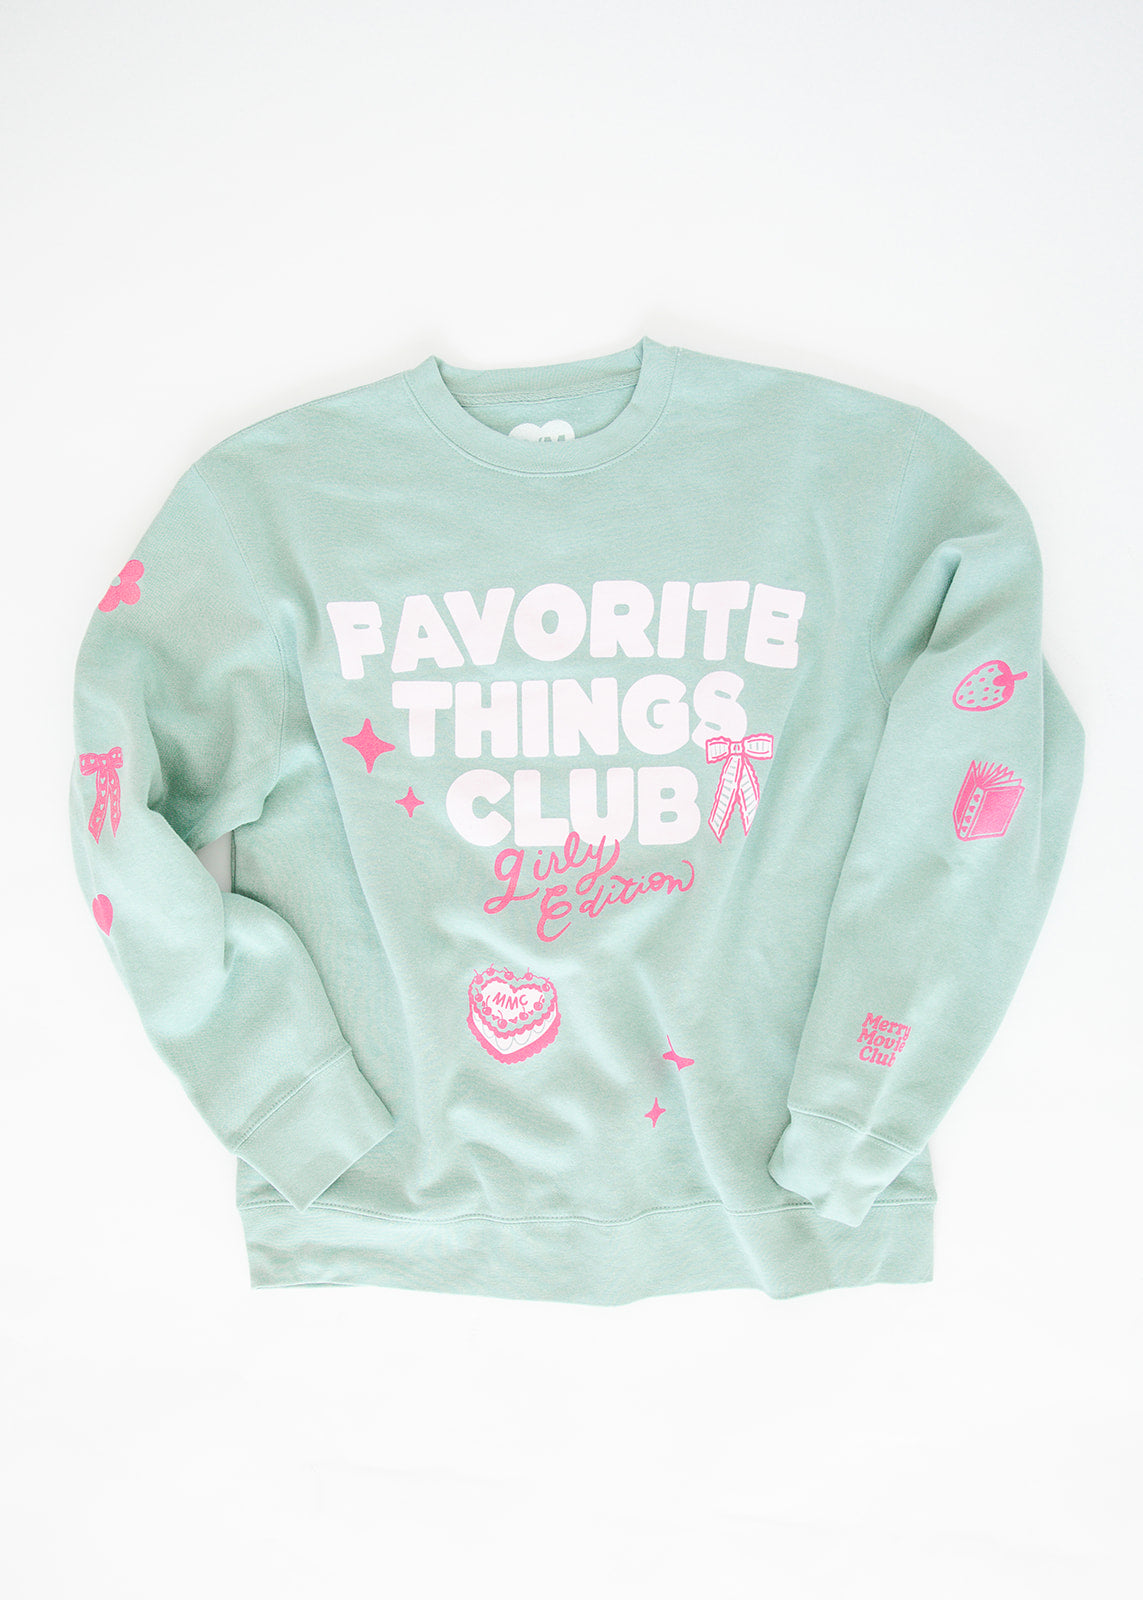 Favorite Things Club: Girly Edition